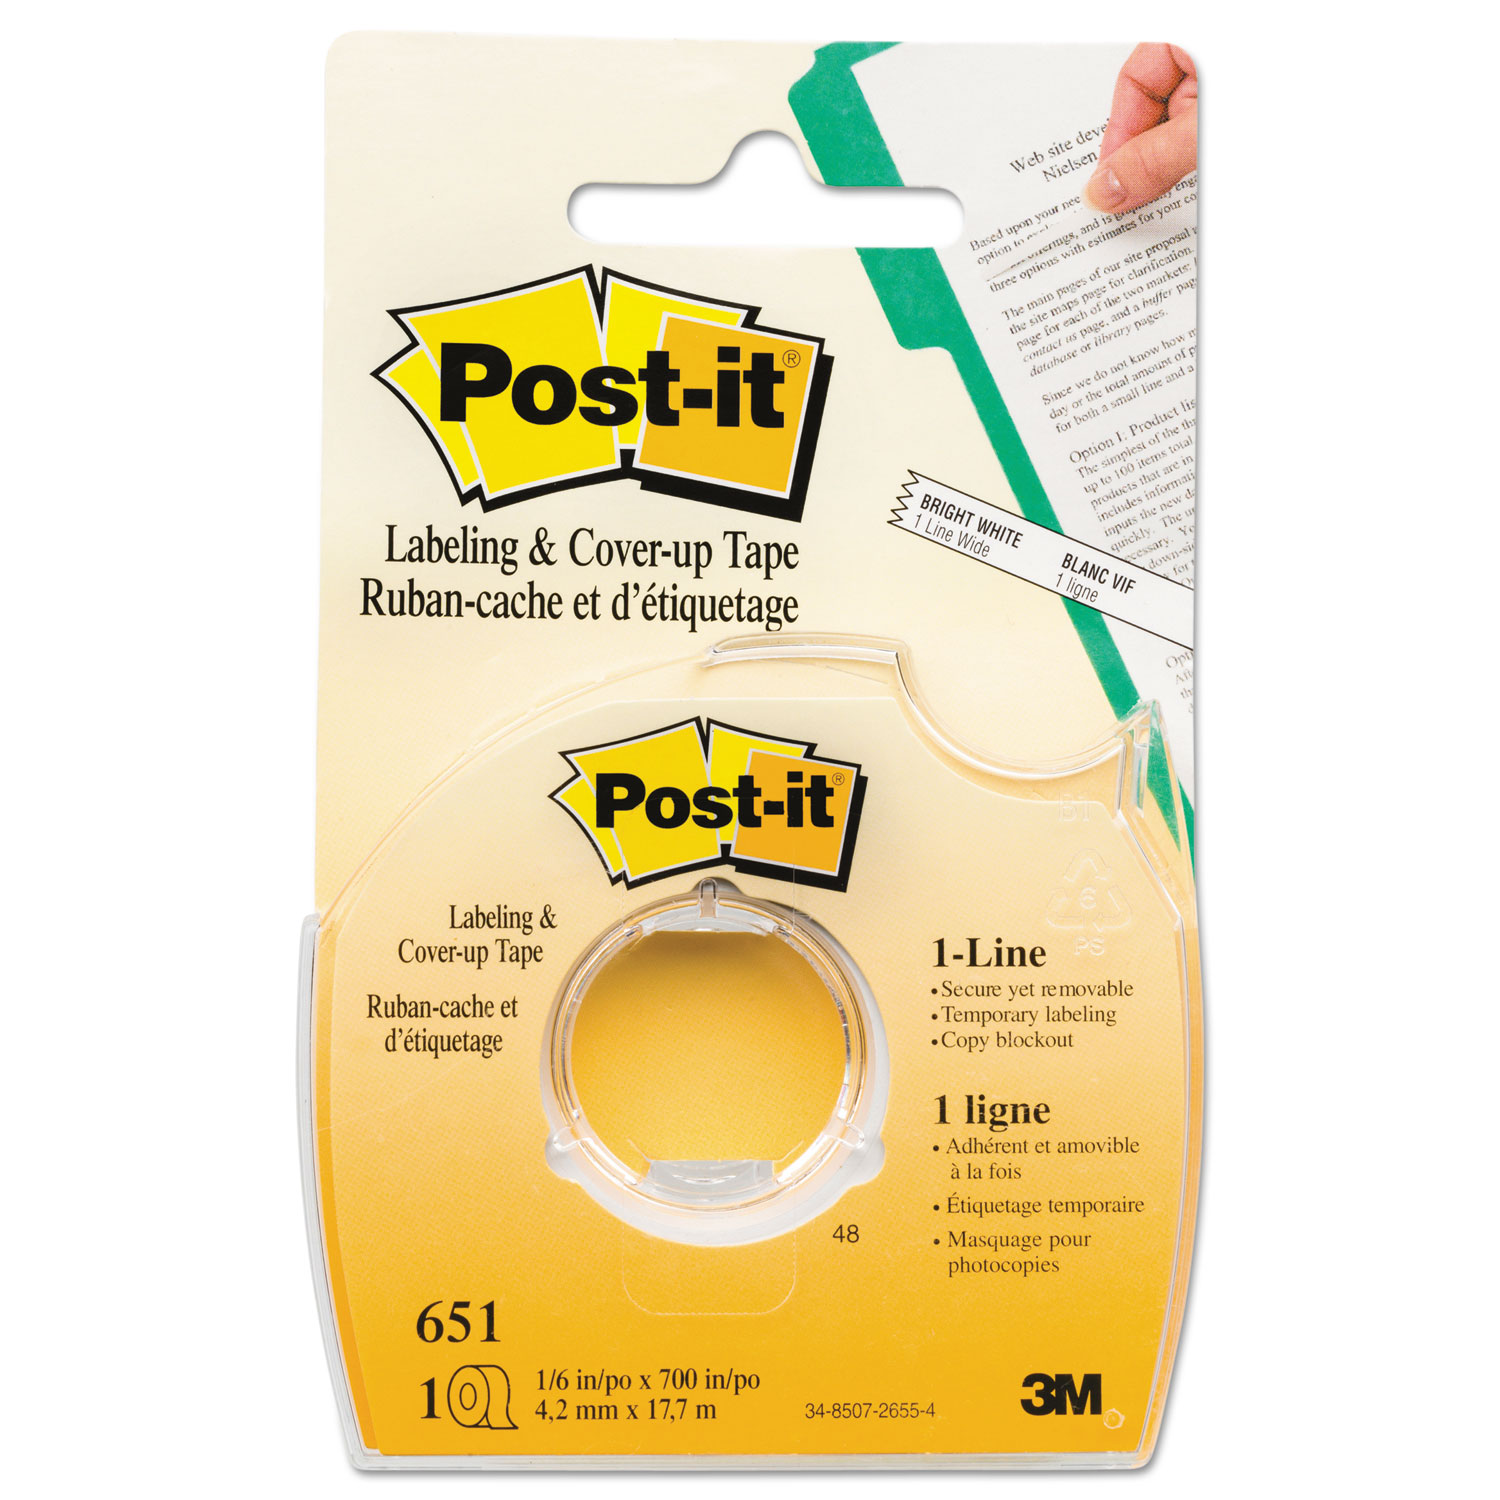  Post-it 651 Labeling & Cover-Up Tape, Non-Refillable, 1/6 x 700 Roll (MMM651) 